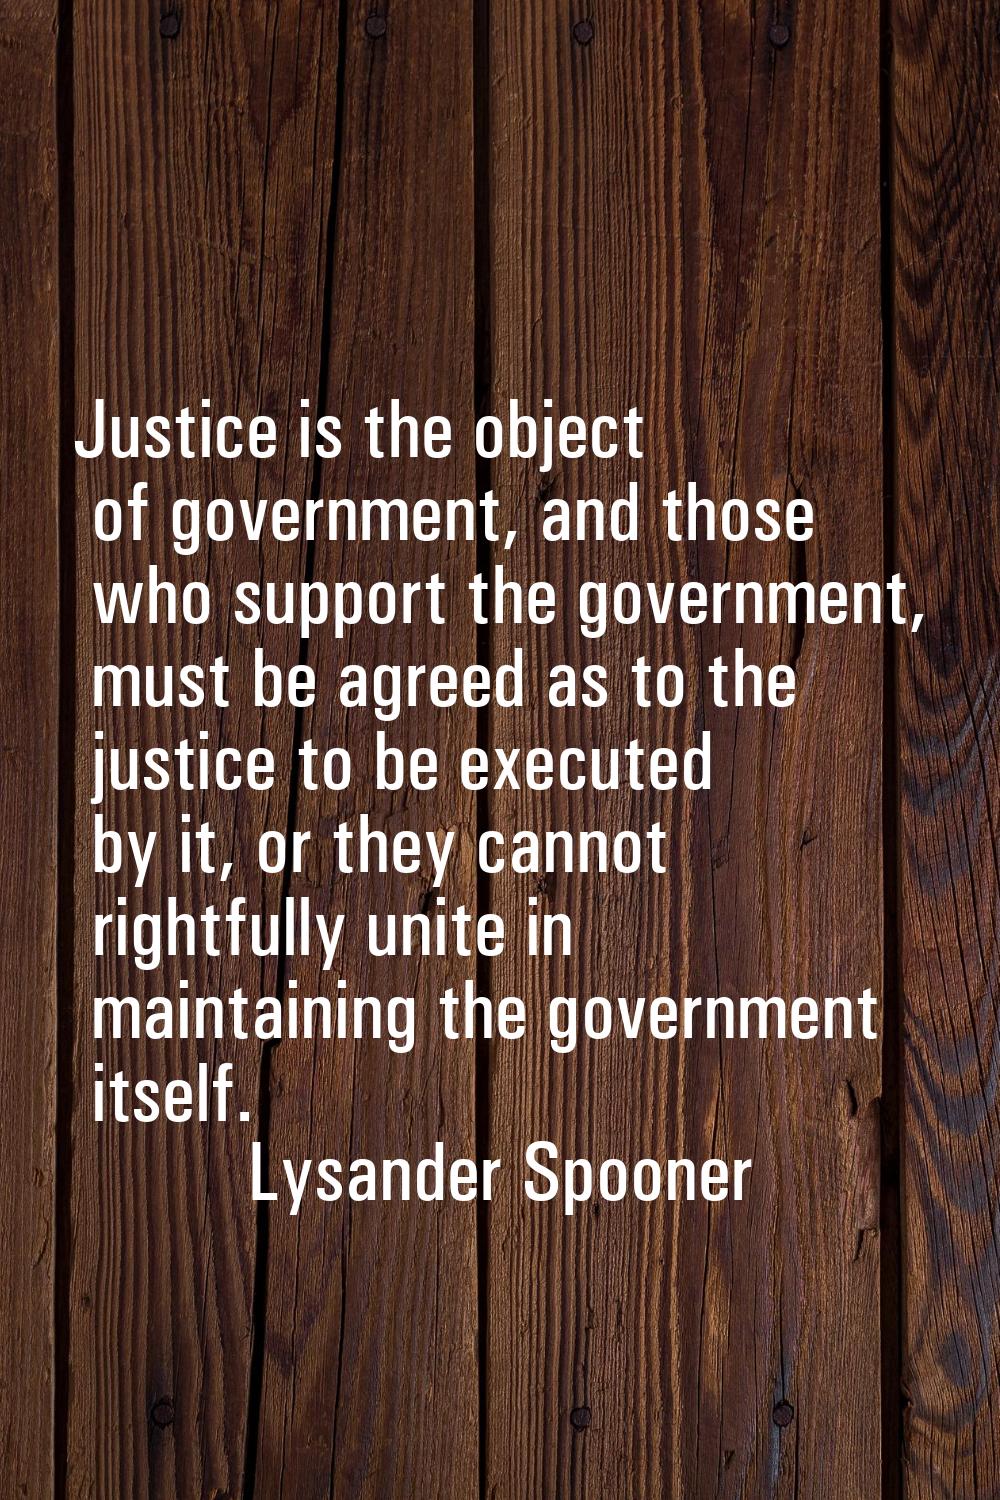 Justice is the object of government, and those who support the government, must be agreed as to the